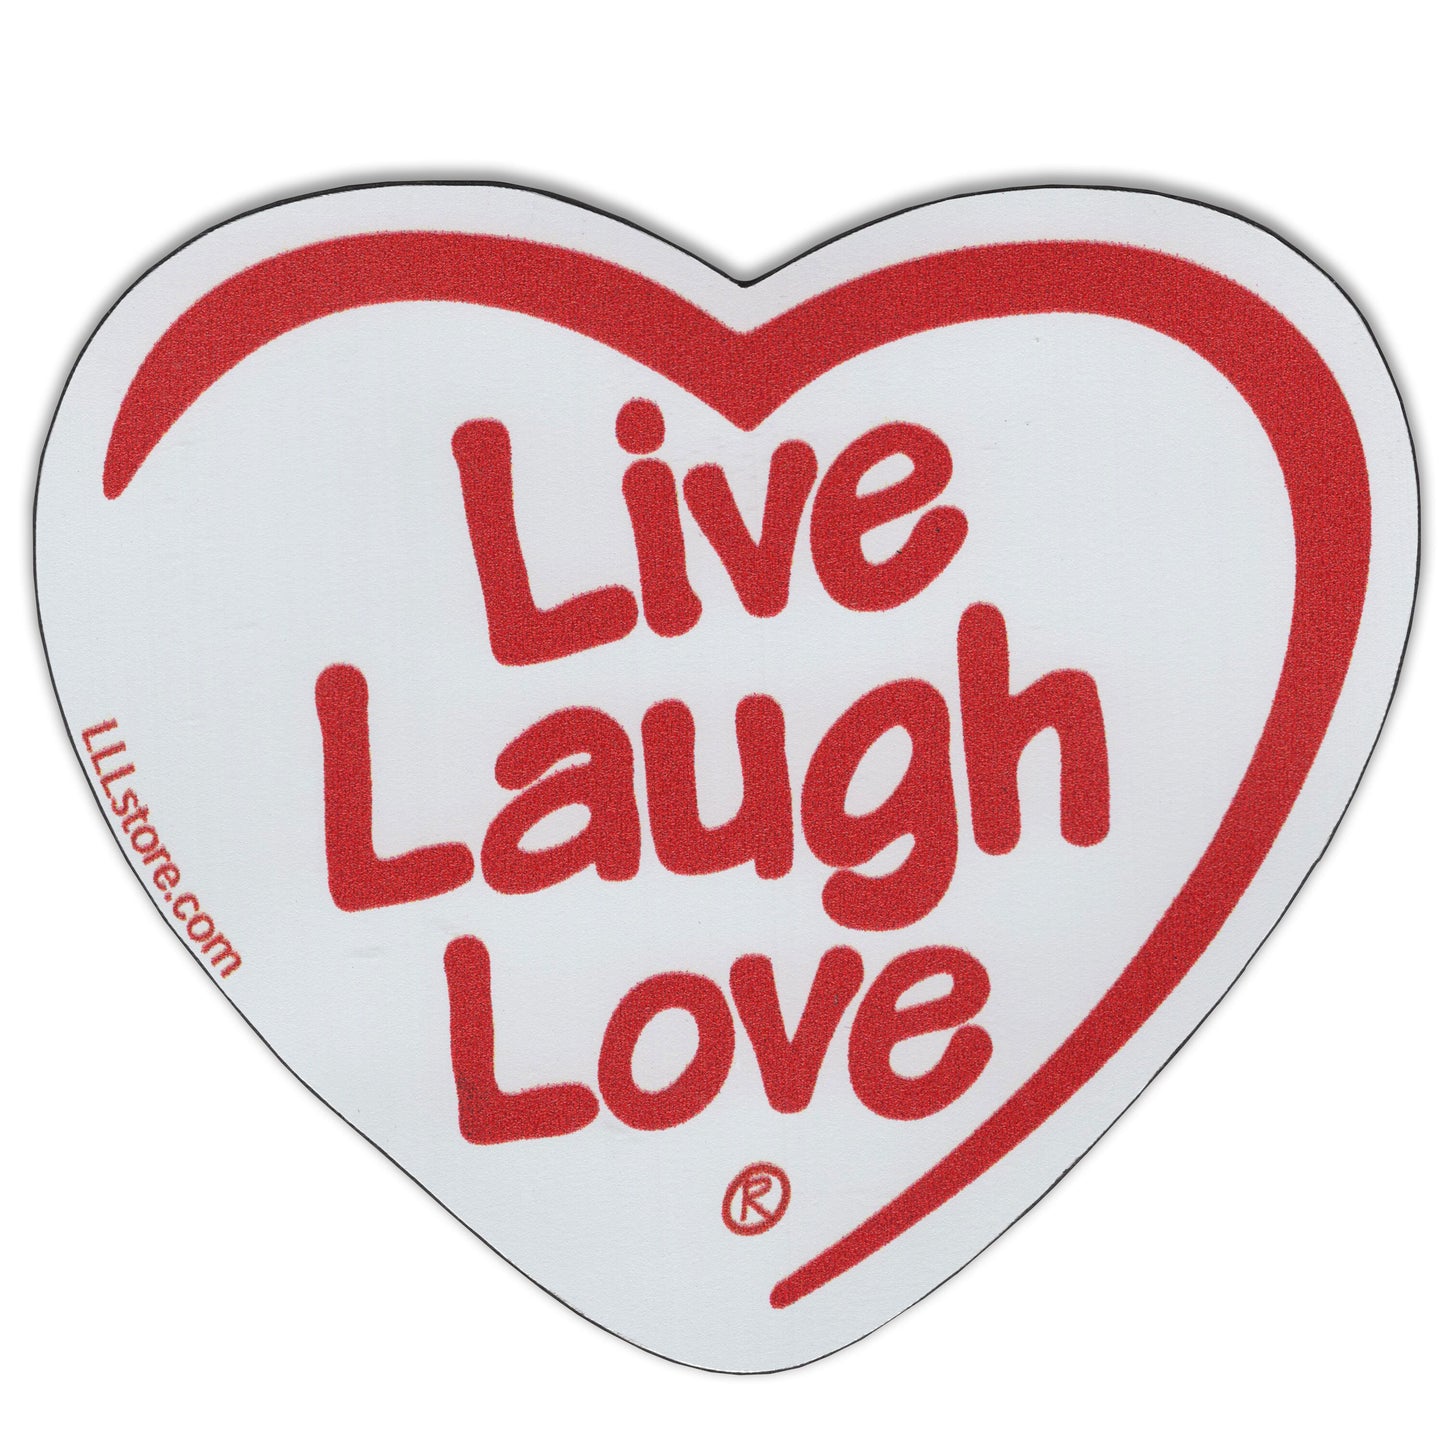 Live Laugh Love® Decorative Heart Shape Message Magnet - Red on White